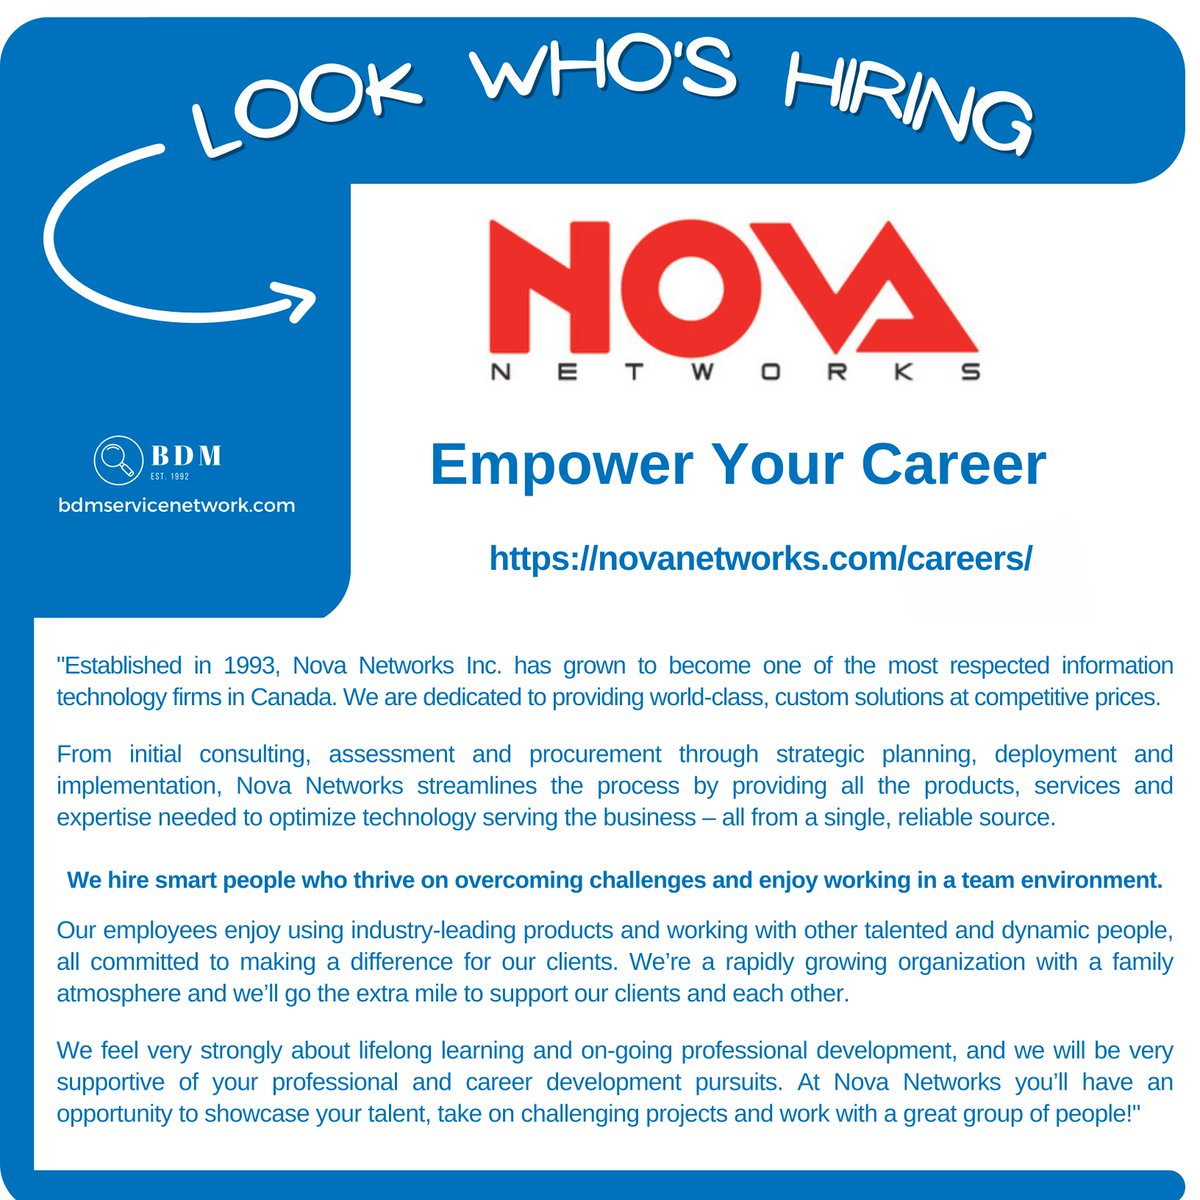 Check out #greatopportunities in #ottawa and #montreal at Nova Networks buff.ly/3rxPQxc #accountmanager #accountsreceivable #appletech #servicedeskanalyst #linuxengineer #networkengineer #servicedeskanalyst #salesexecutive #jobs #hiring courtesy buff.ly/42ubE9v